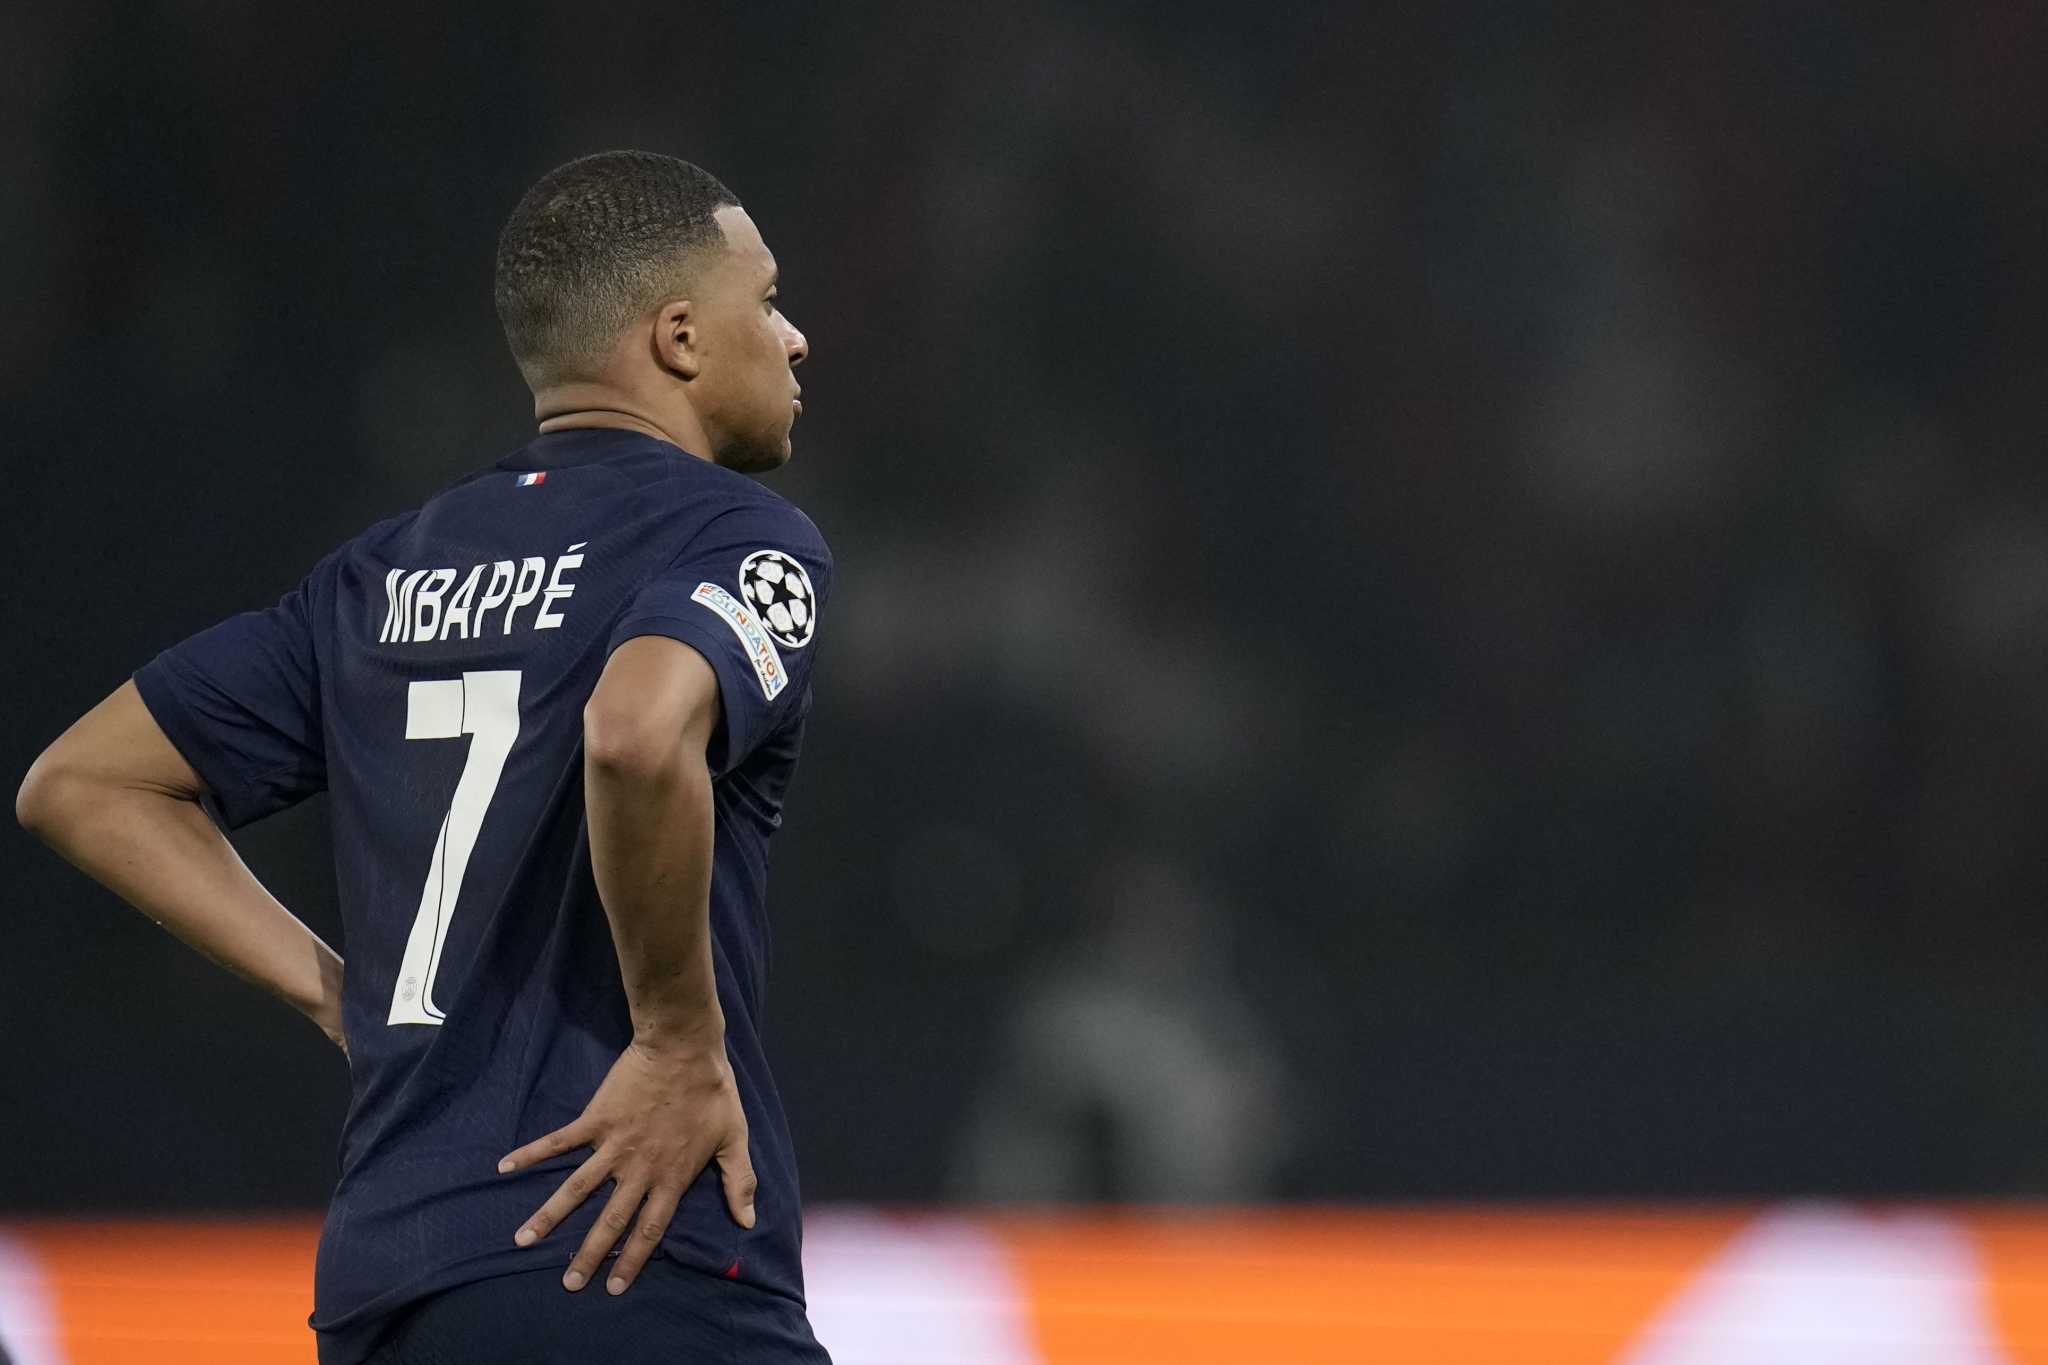 PSG faces a difficult rebuilding task without Mbappé as the curtain falls on superstar era